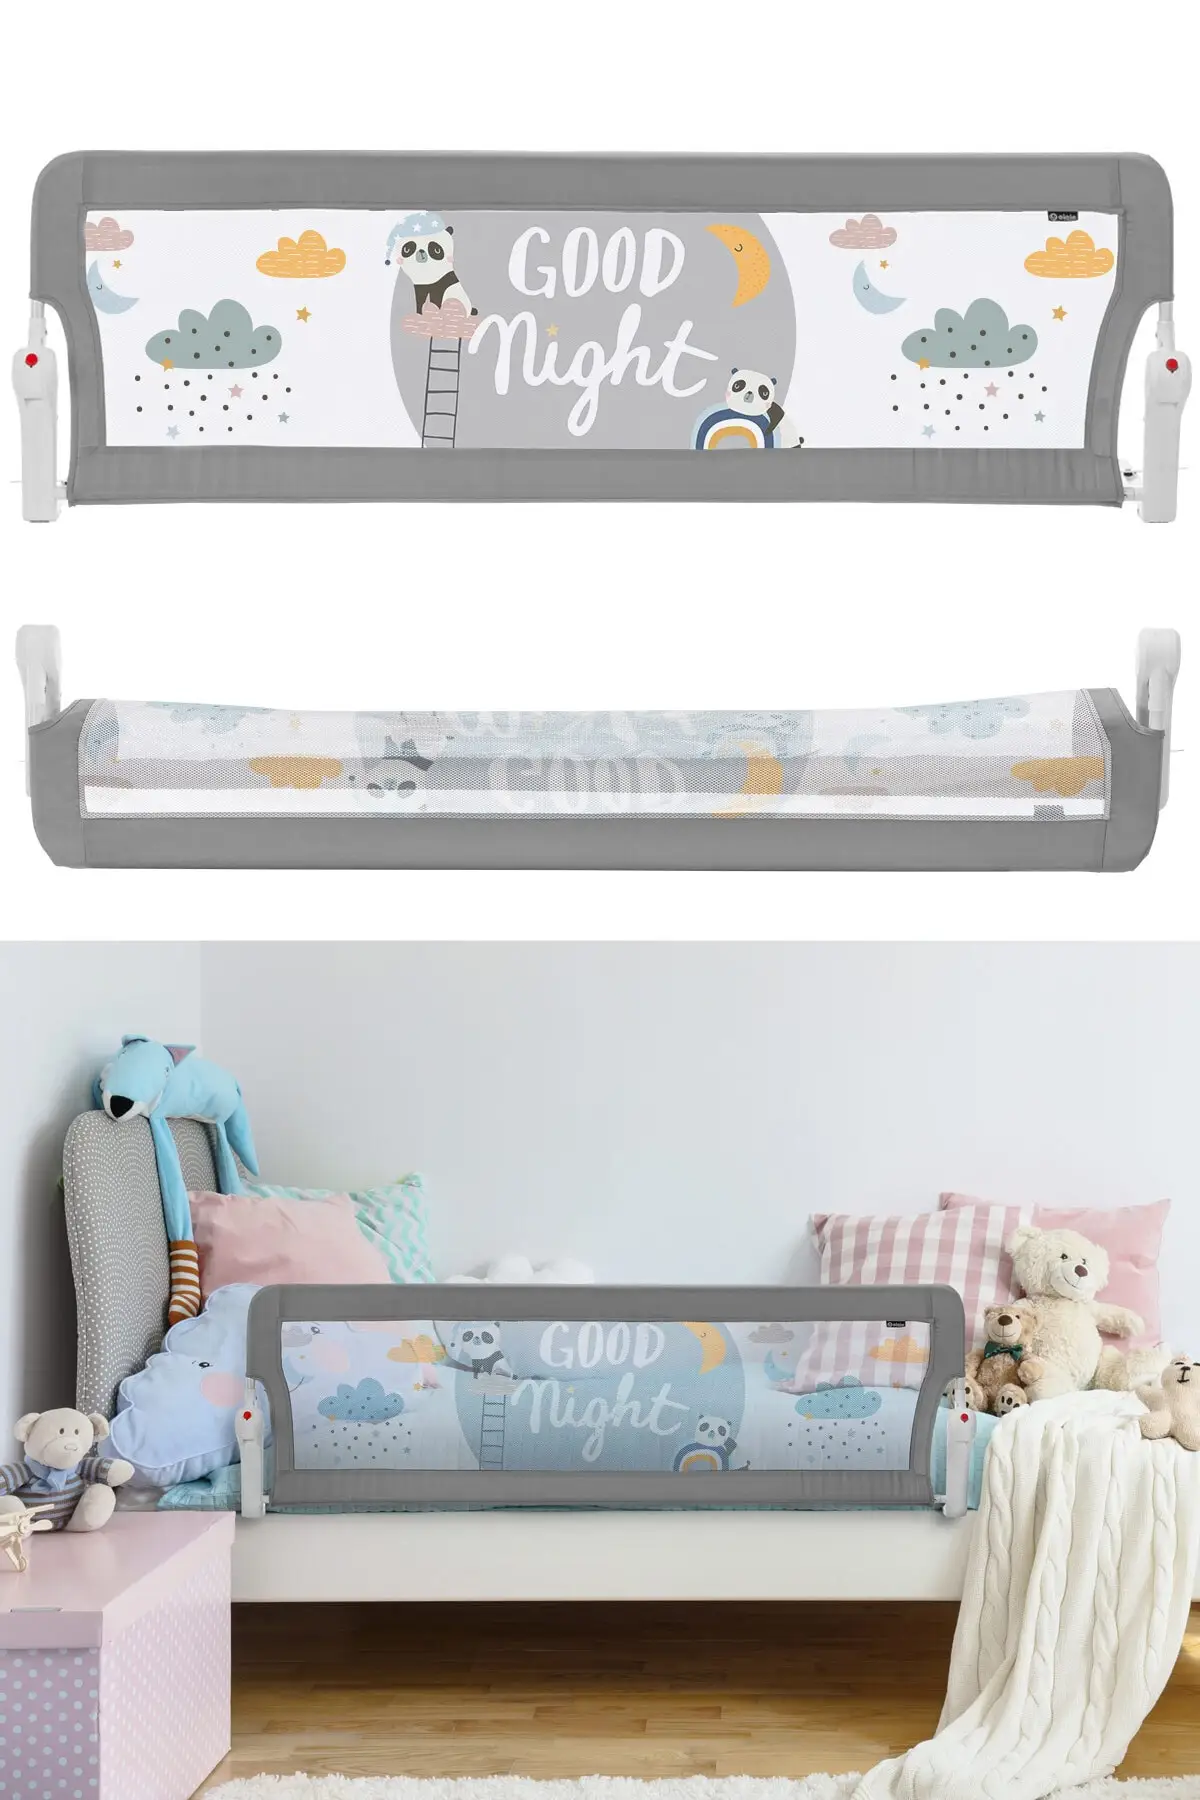 Good Night Extra Large Comfortable Sleep Safe Easy to Use Guardrail Foldable Adjustable Bed Barrier Fencing For Babies and Kids